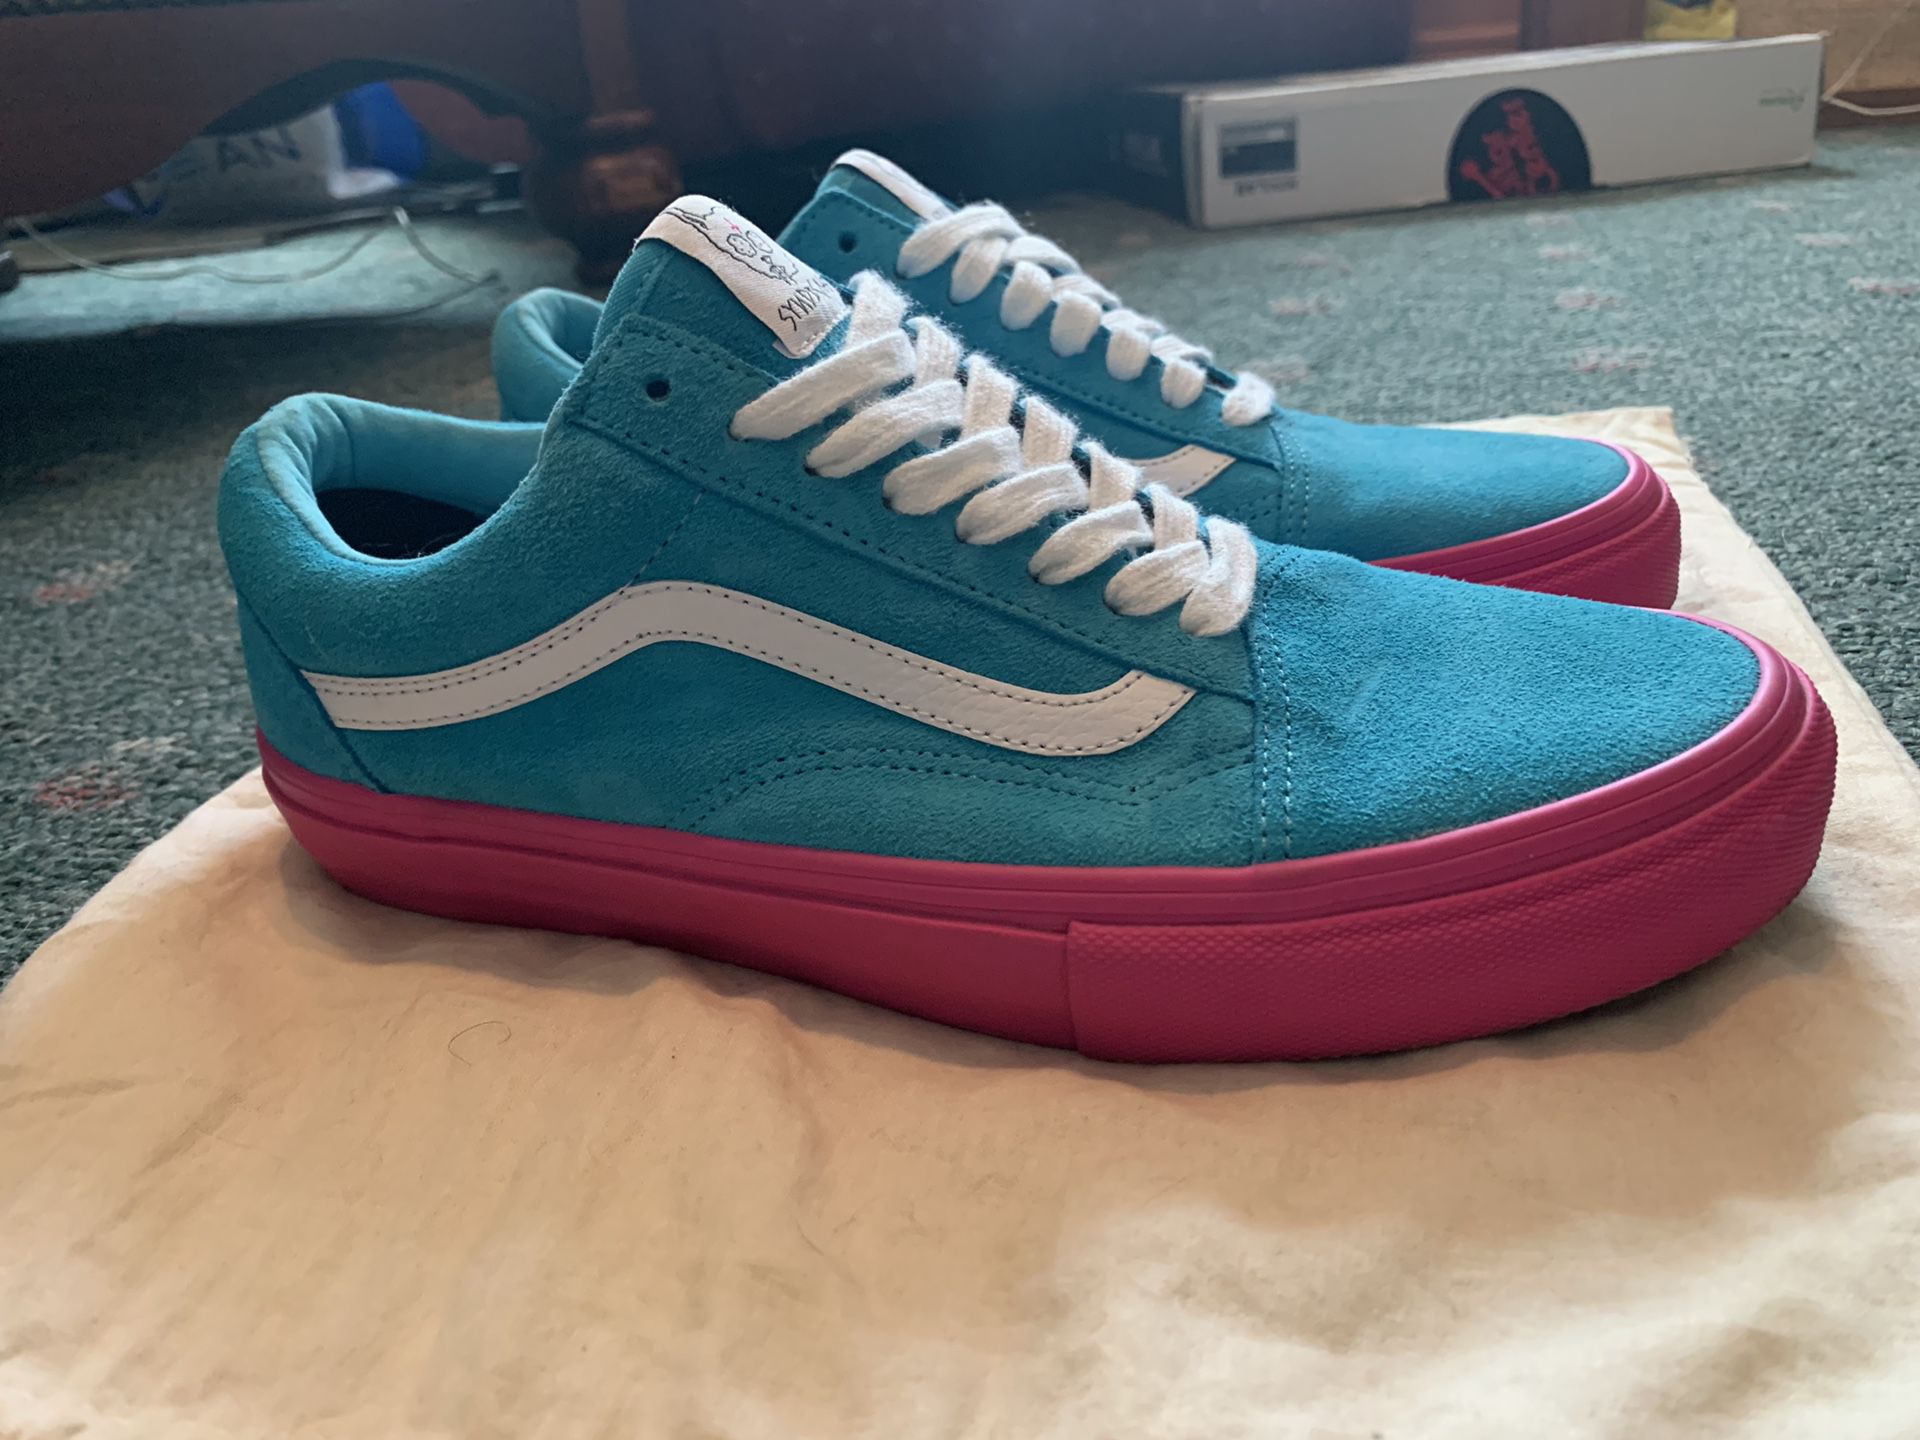 Golf Wang Syndicate Vans for Sale in Atlantic City, NJ - OfferUp